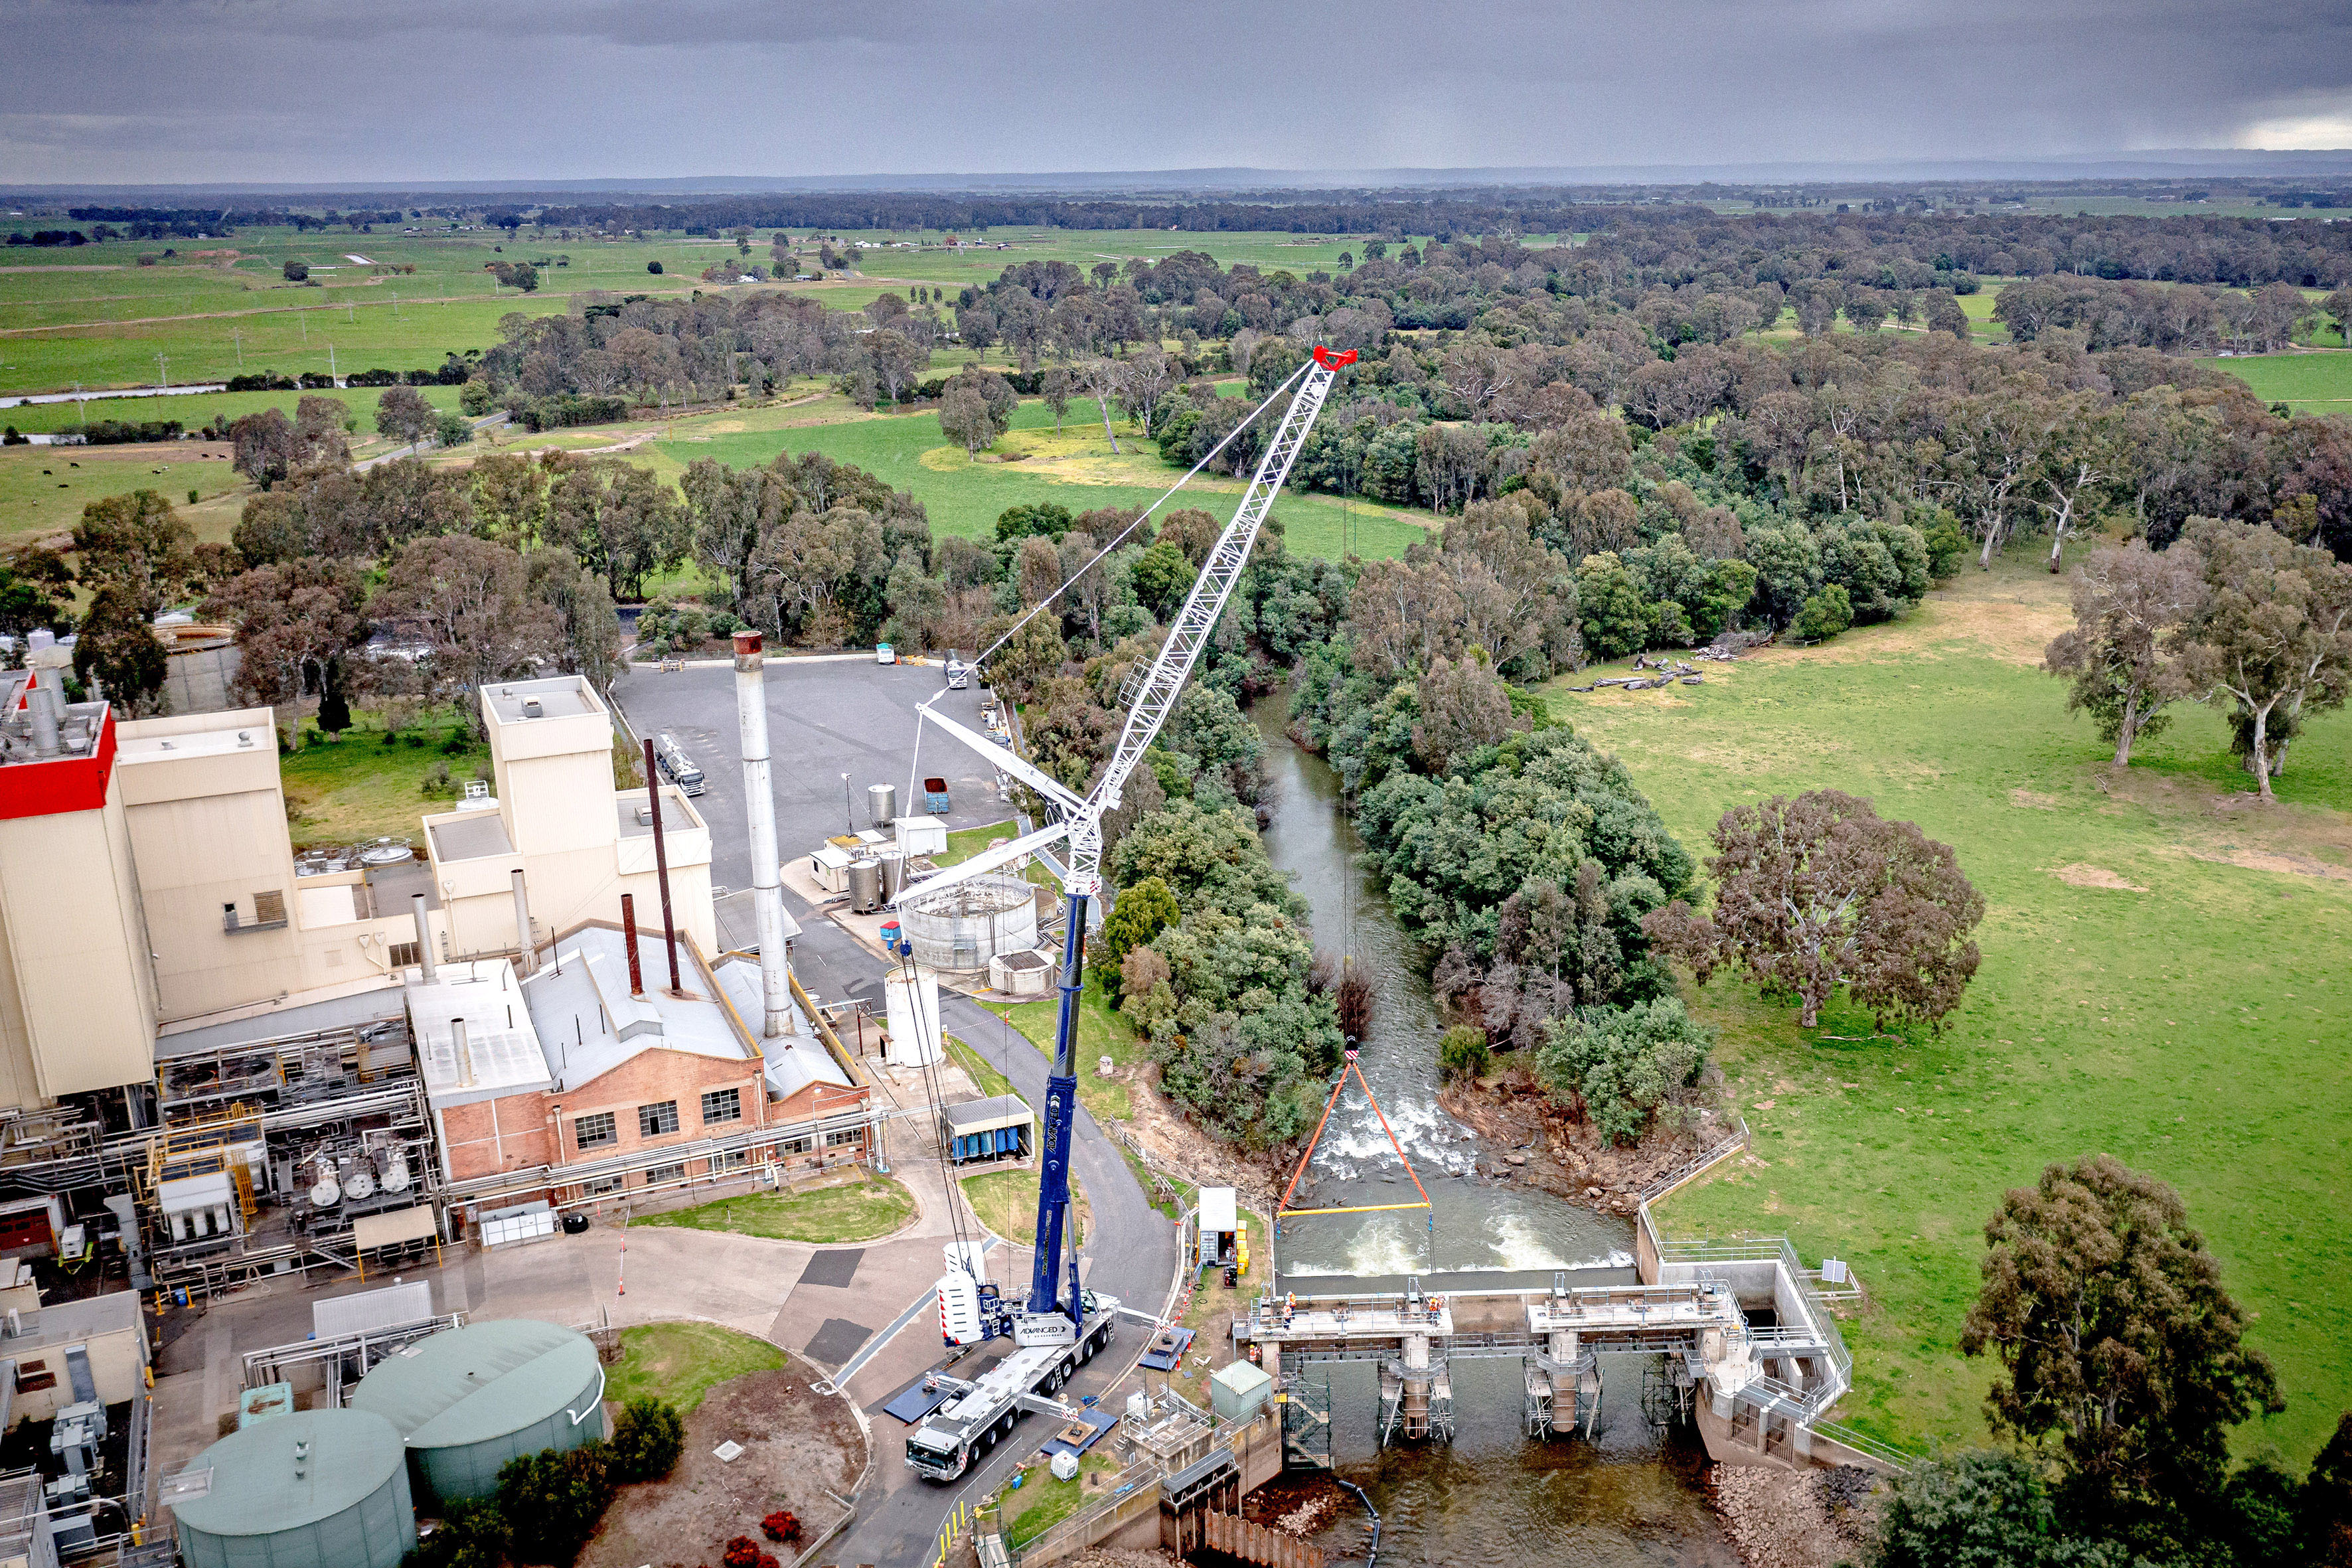 Advanced Cranes’ LTM 1450-8.1 dismantled the 60 year old Maffra Weir on Macalister River in Victoria